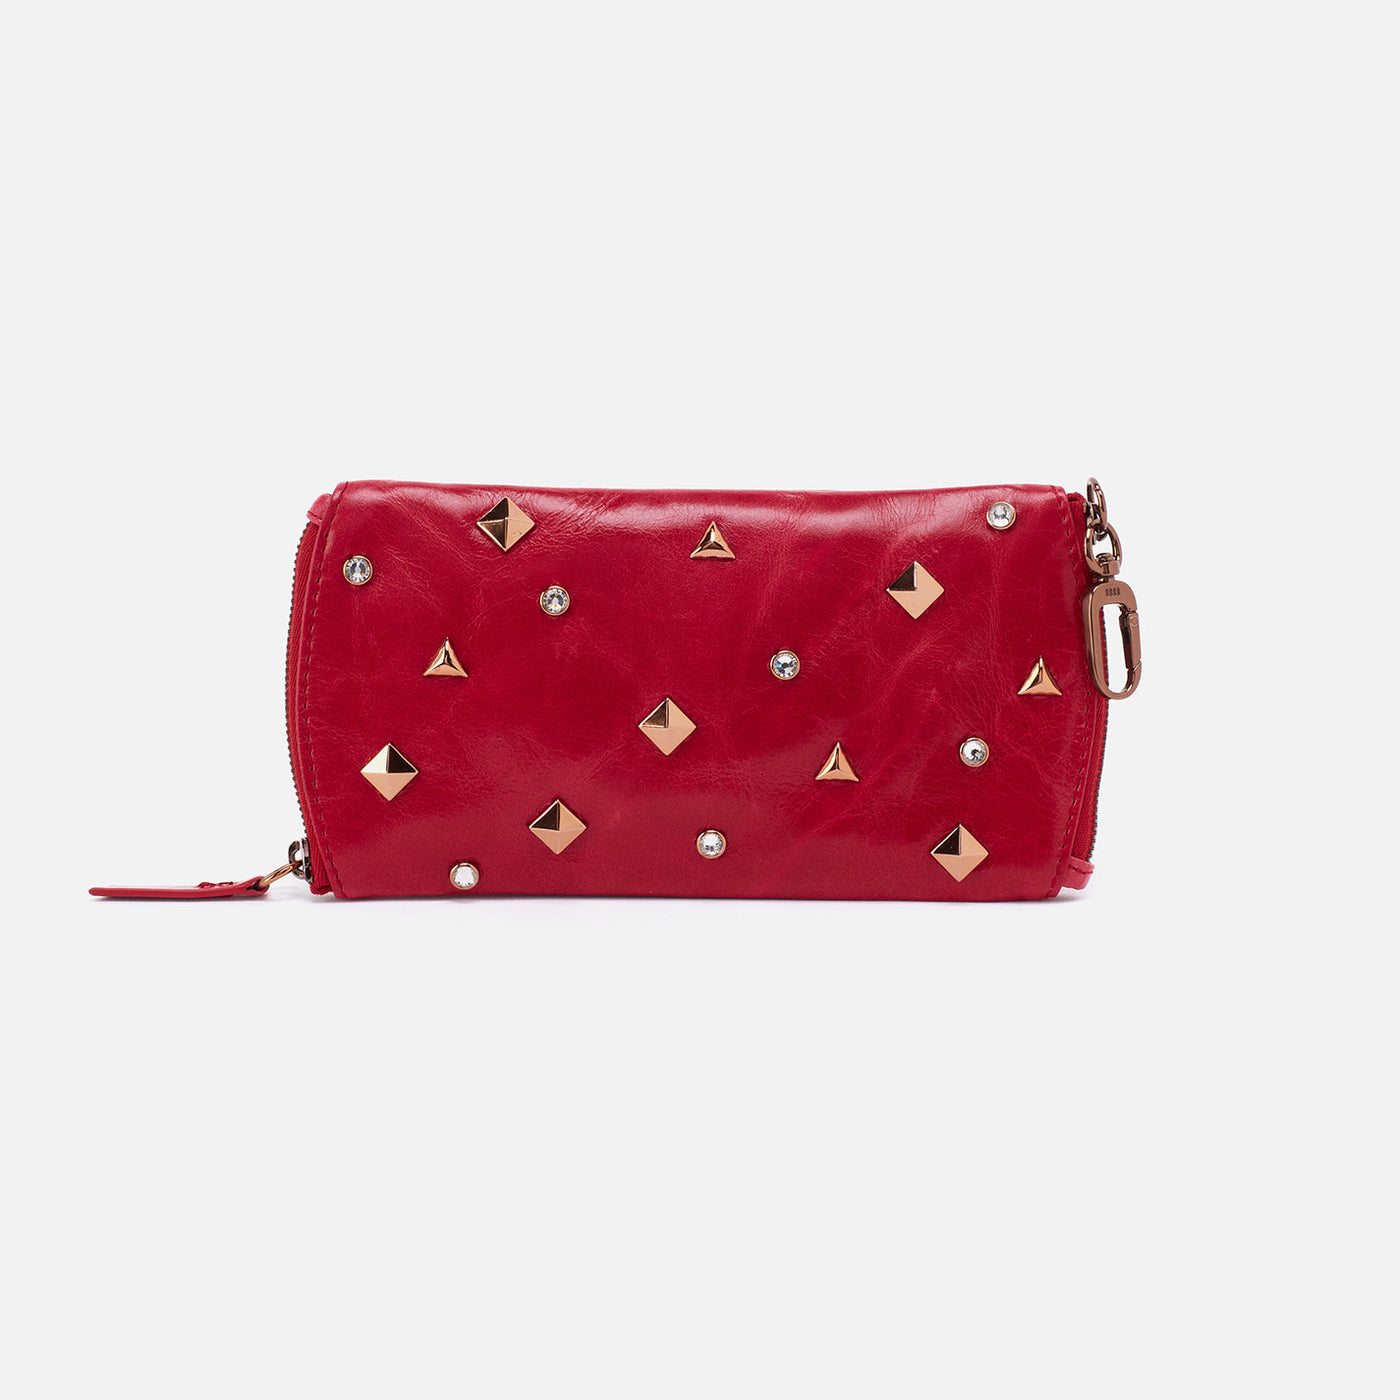 Spark Double Eyeglass Case in Polished Leather - Claret